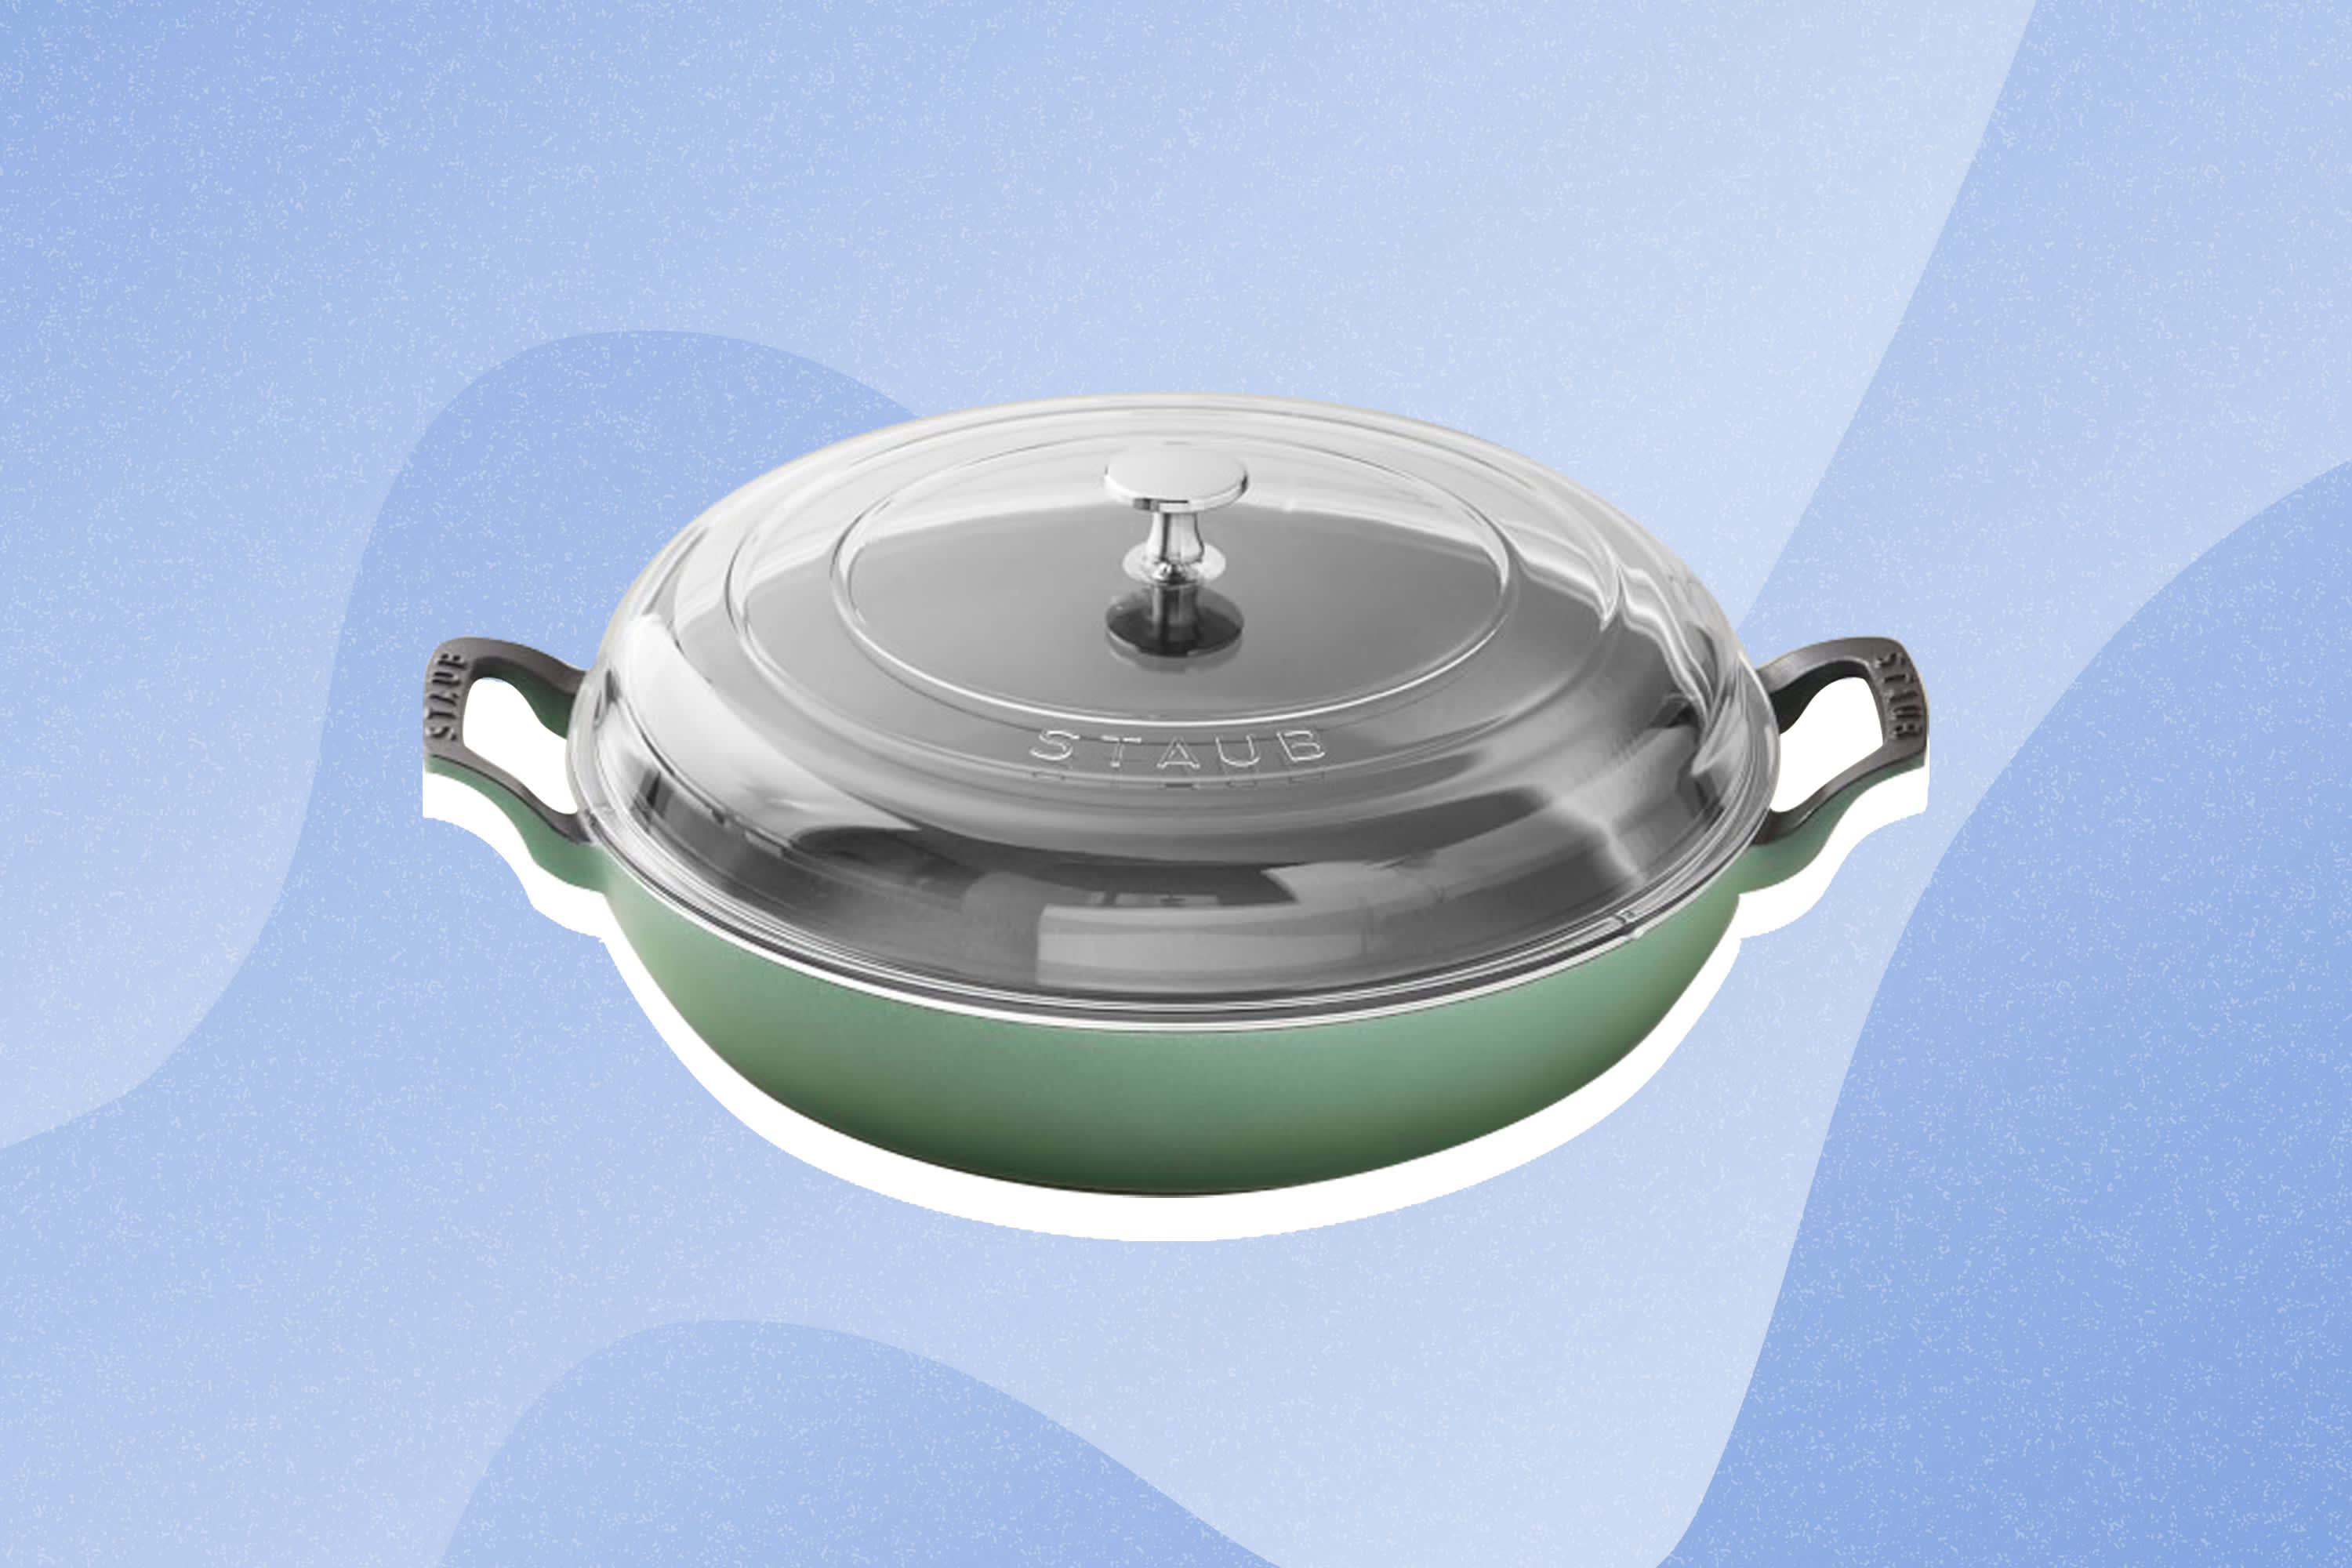 Get the Staub grill pan for 55% off and start making the most tender meats